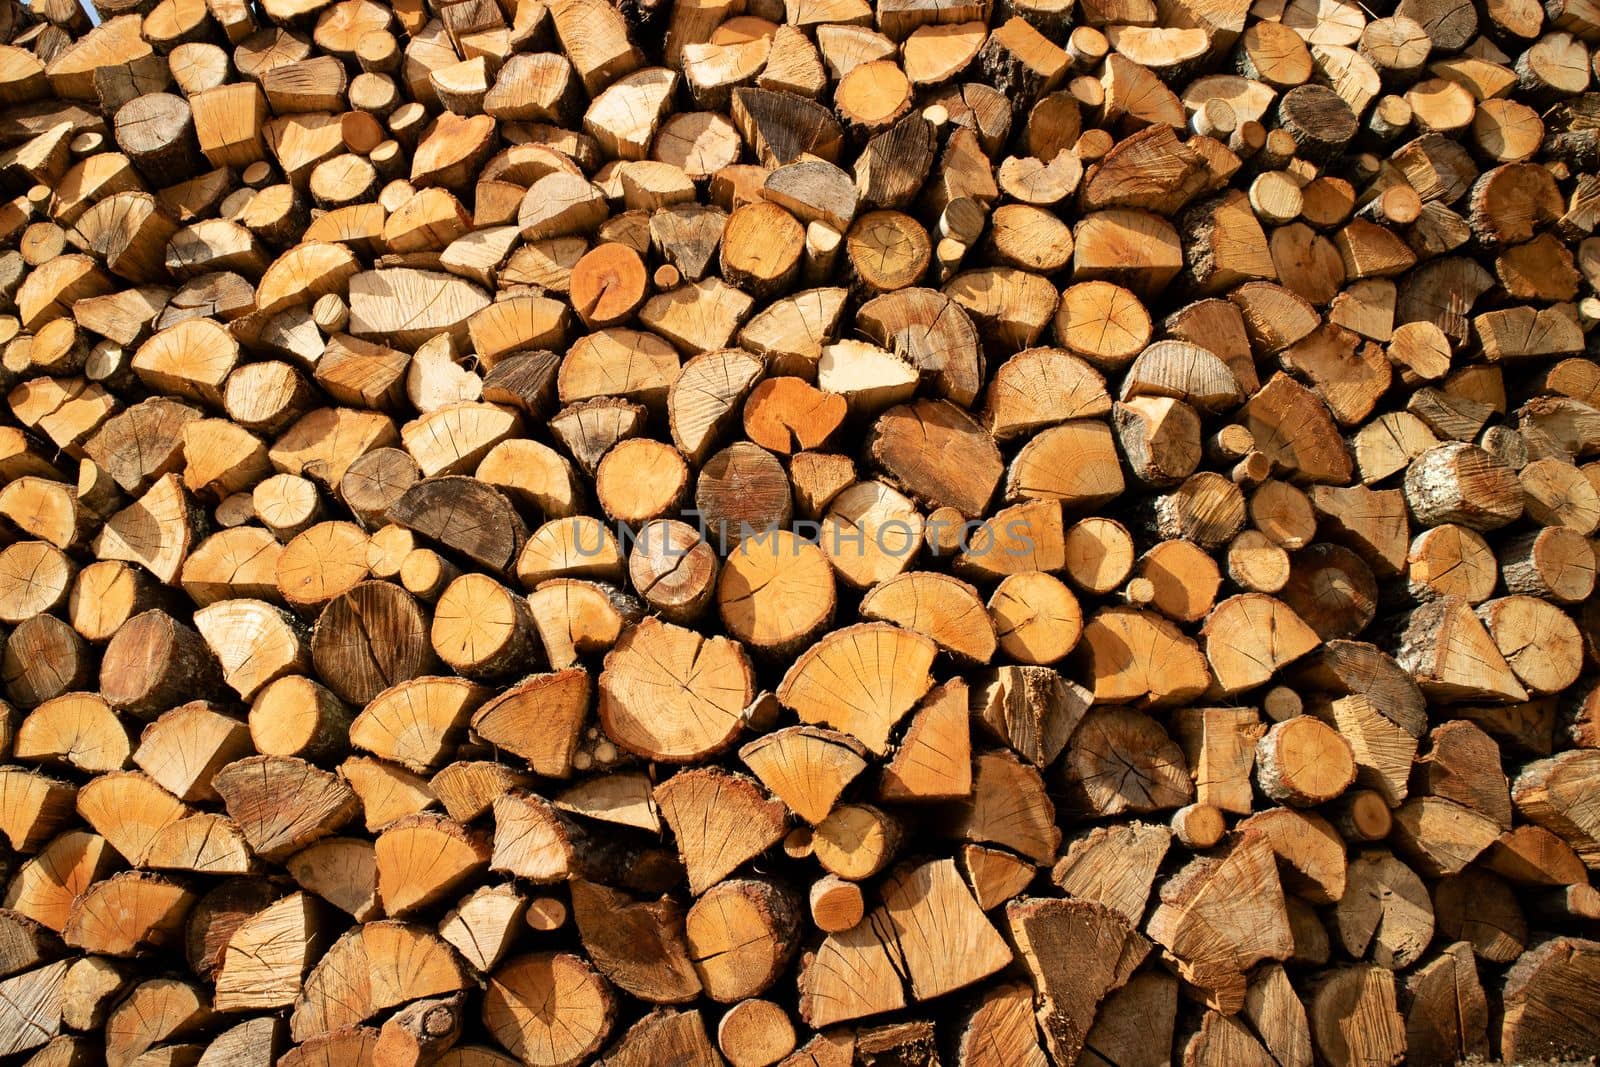 Stock of firewood for the winter  by fotografiche.eu